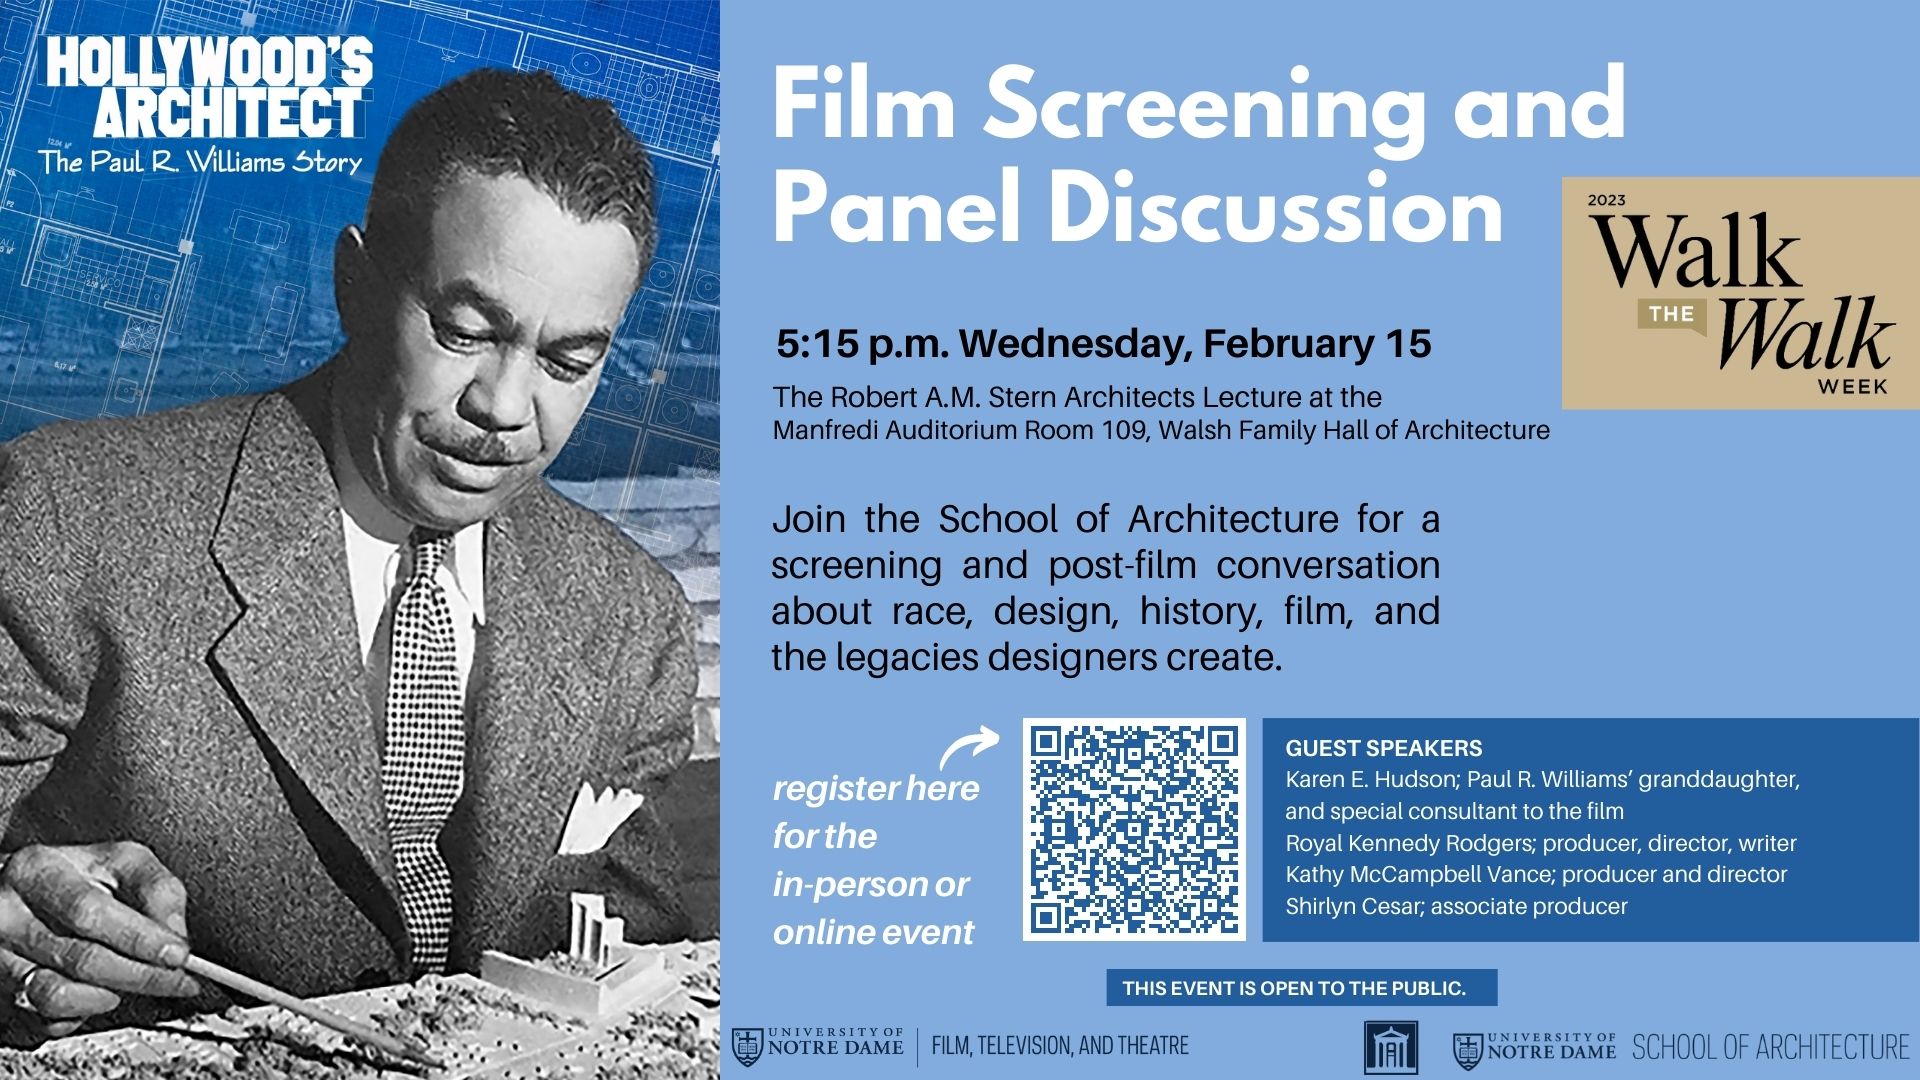 Robert A.M. Stern Architects Lecture Film Screening and Panel Discussion: Hollywood’s Architect